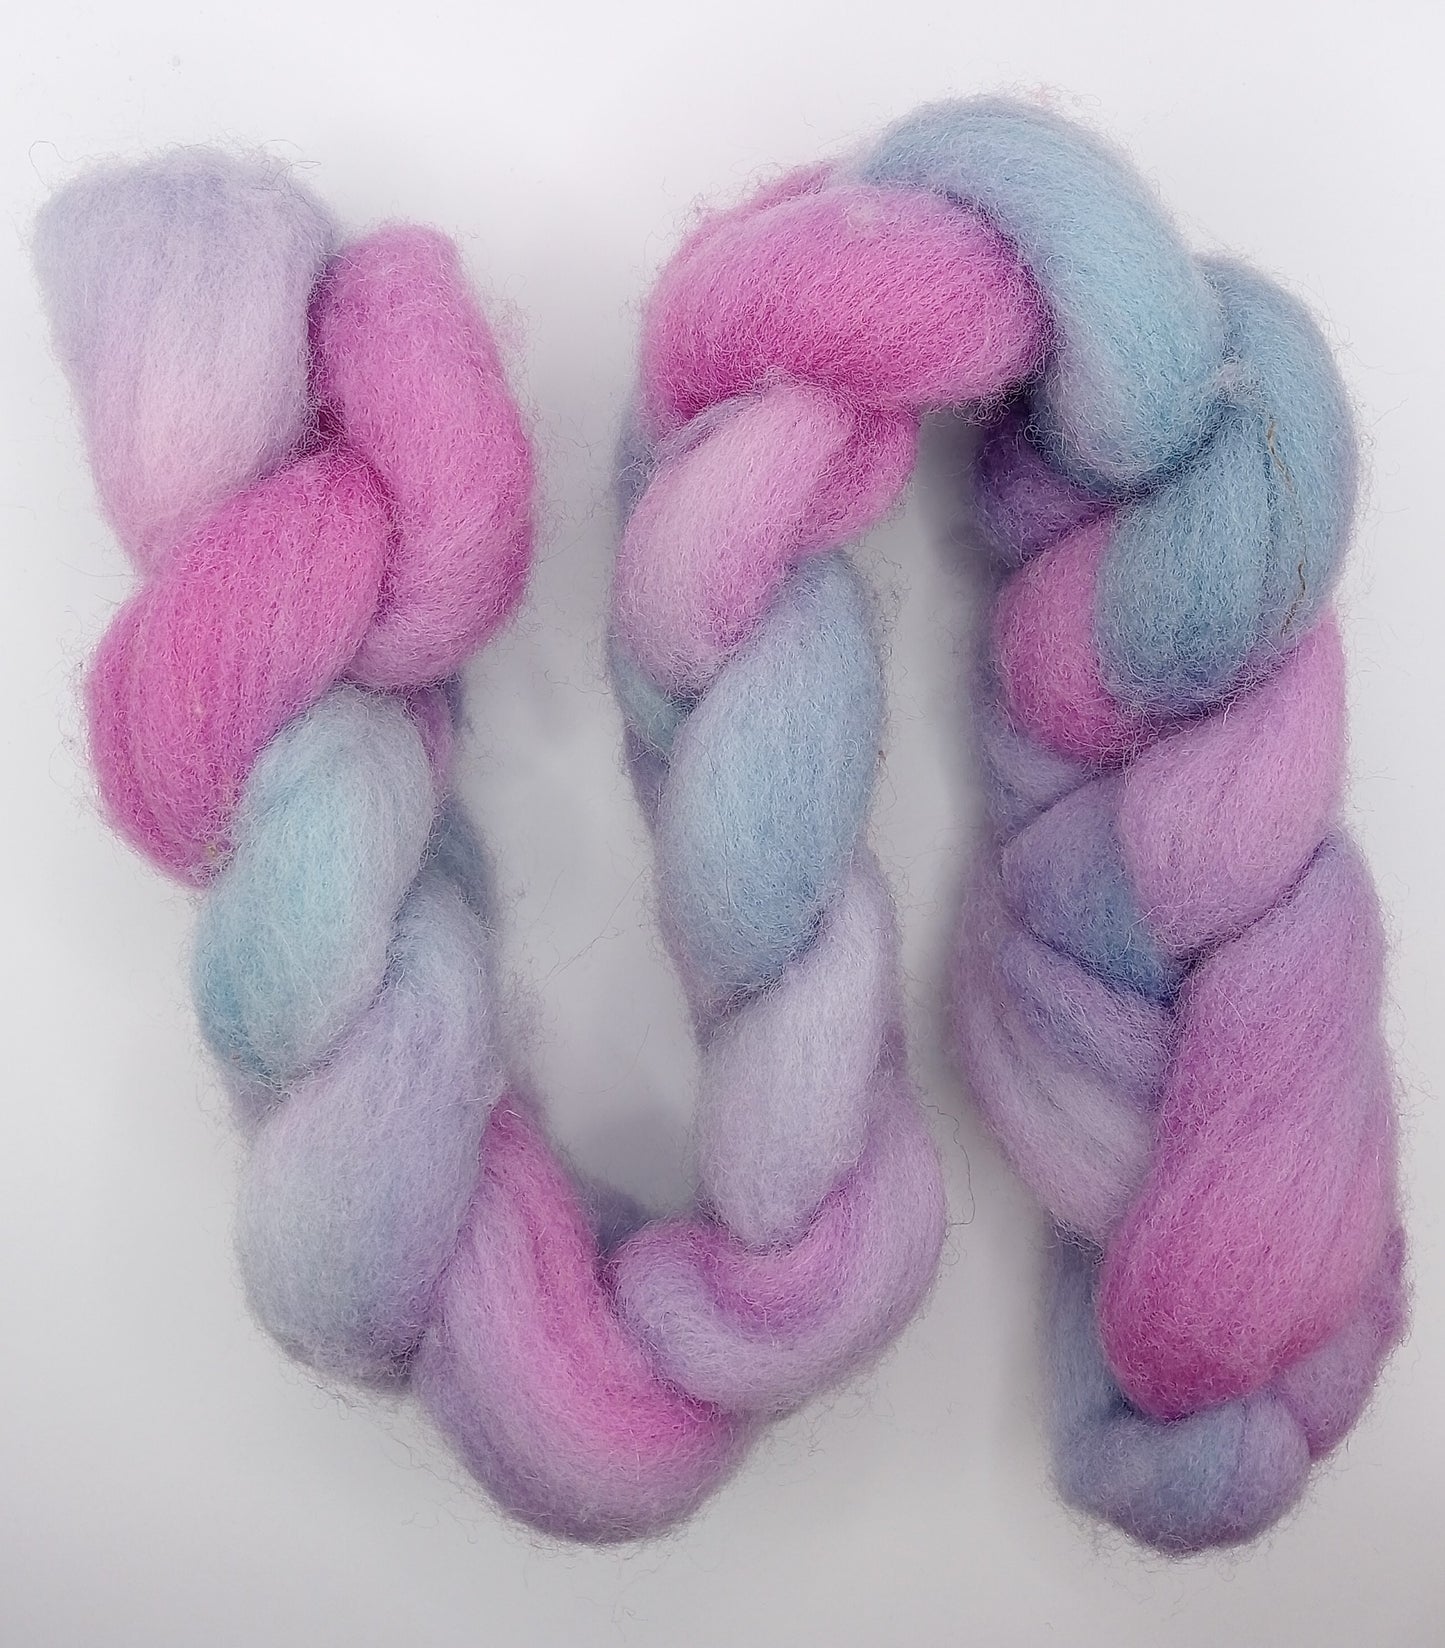 100G New Zealand hand dyed fibre combed top - "Unicorn"